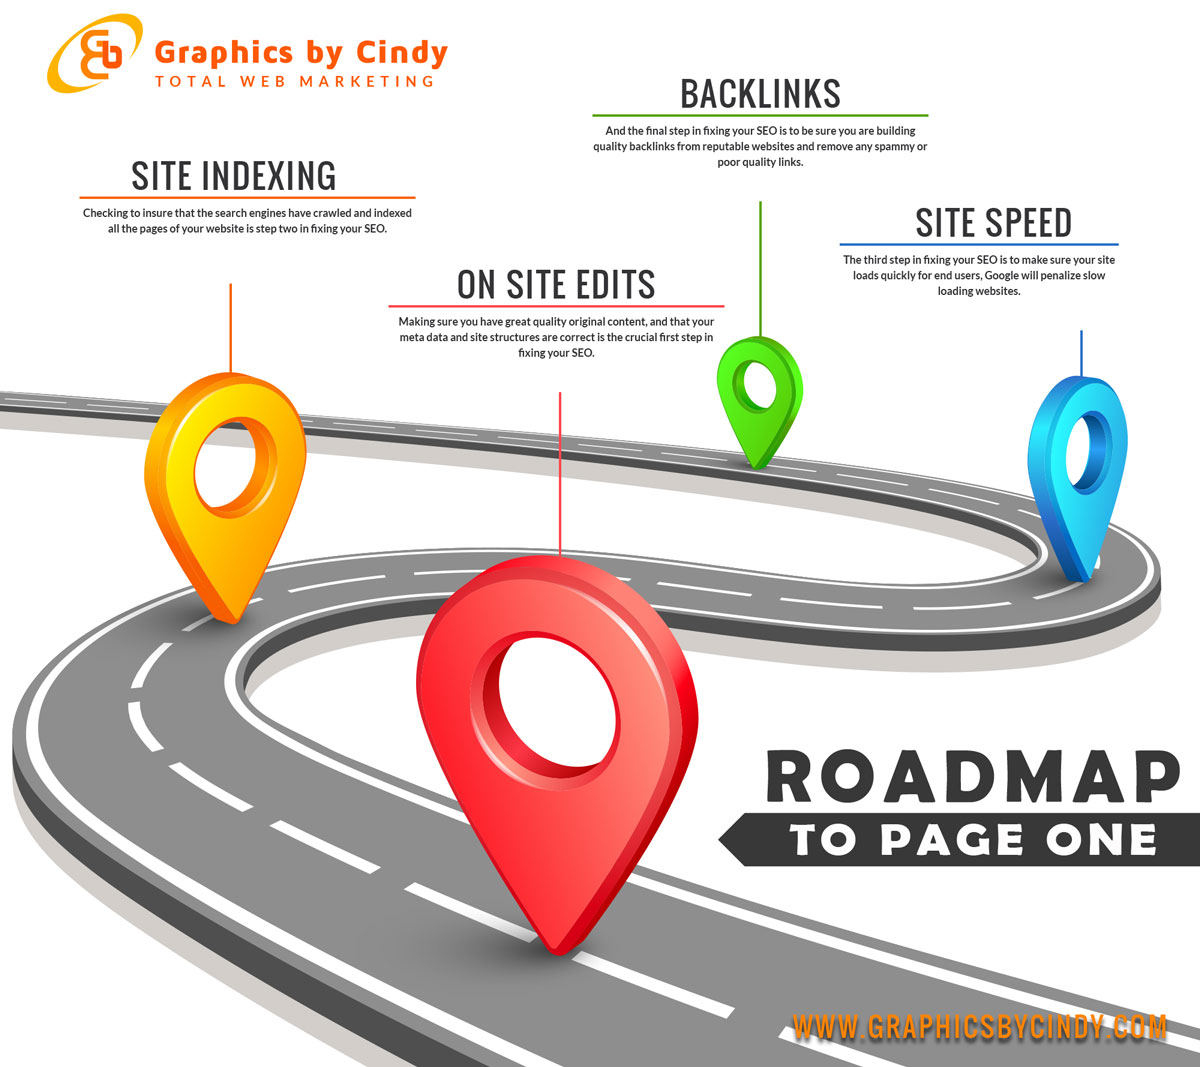 Roadmap to Page One